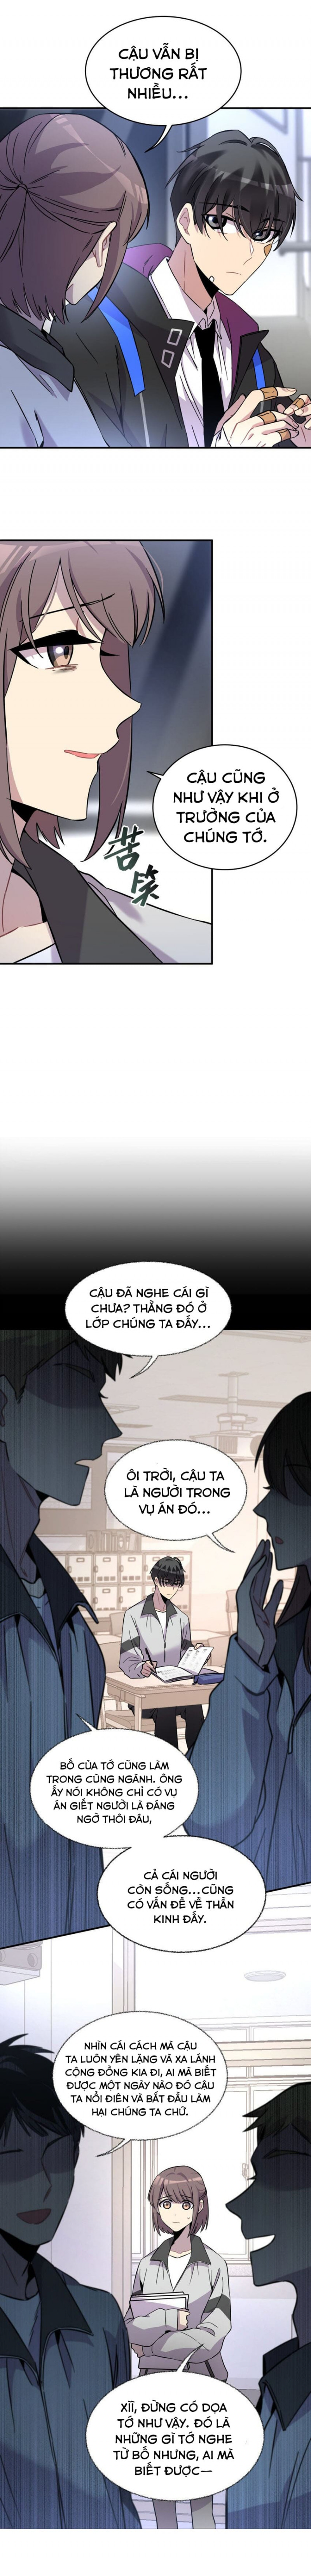 Anemone: Sống Hoặc Chết Chapter 1 - Trang 16